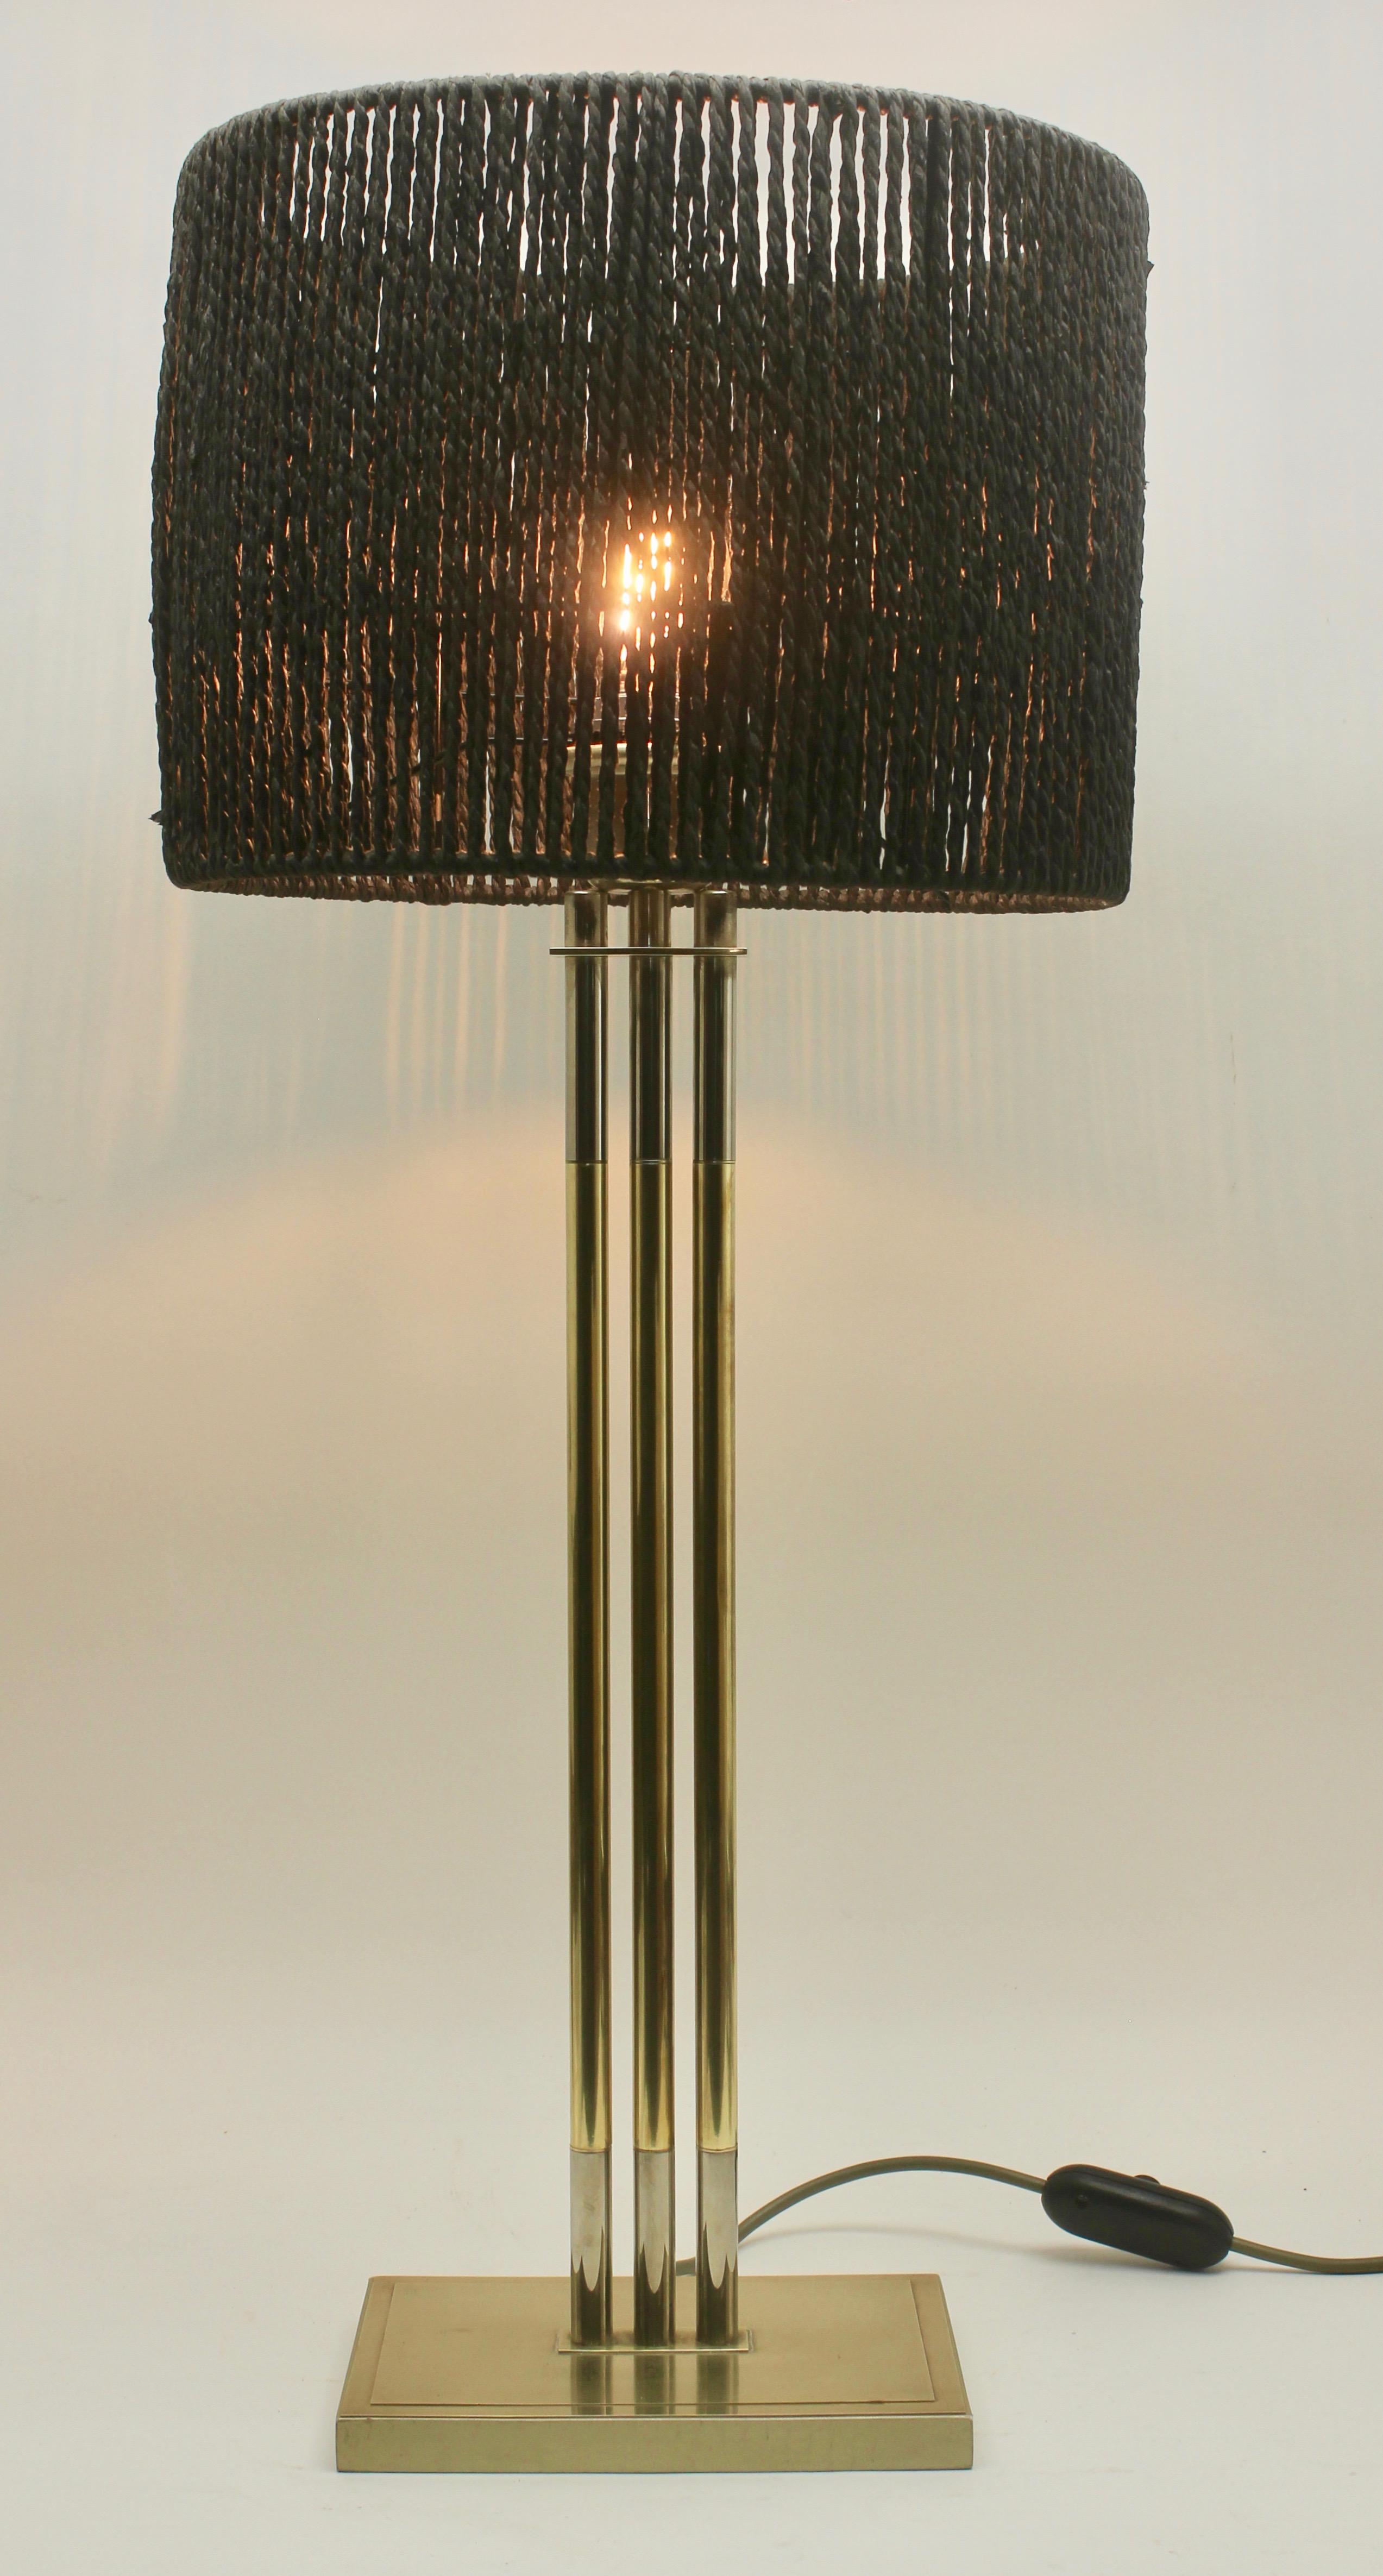 Belgian Vintage Brass Table Lamp by Willy Rizzo for De Knudt, 'Numbered 3784', 1970s